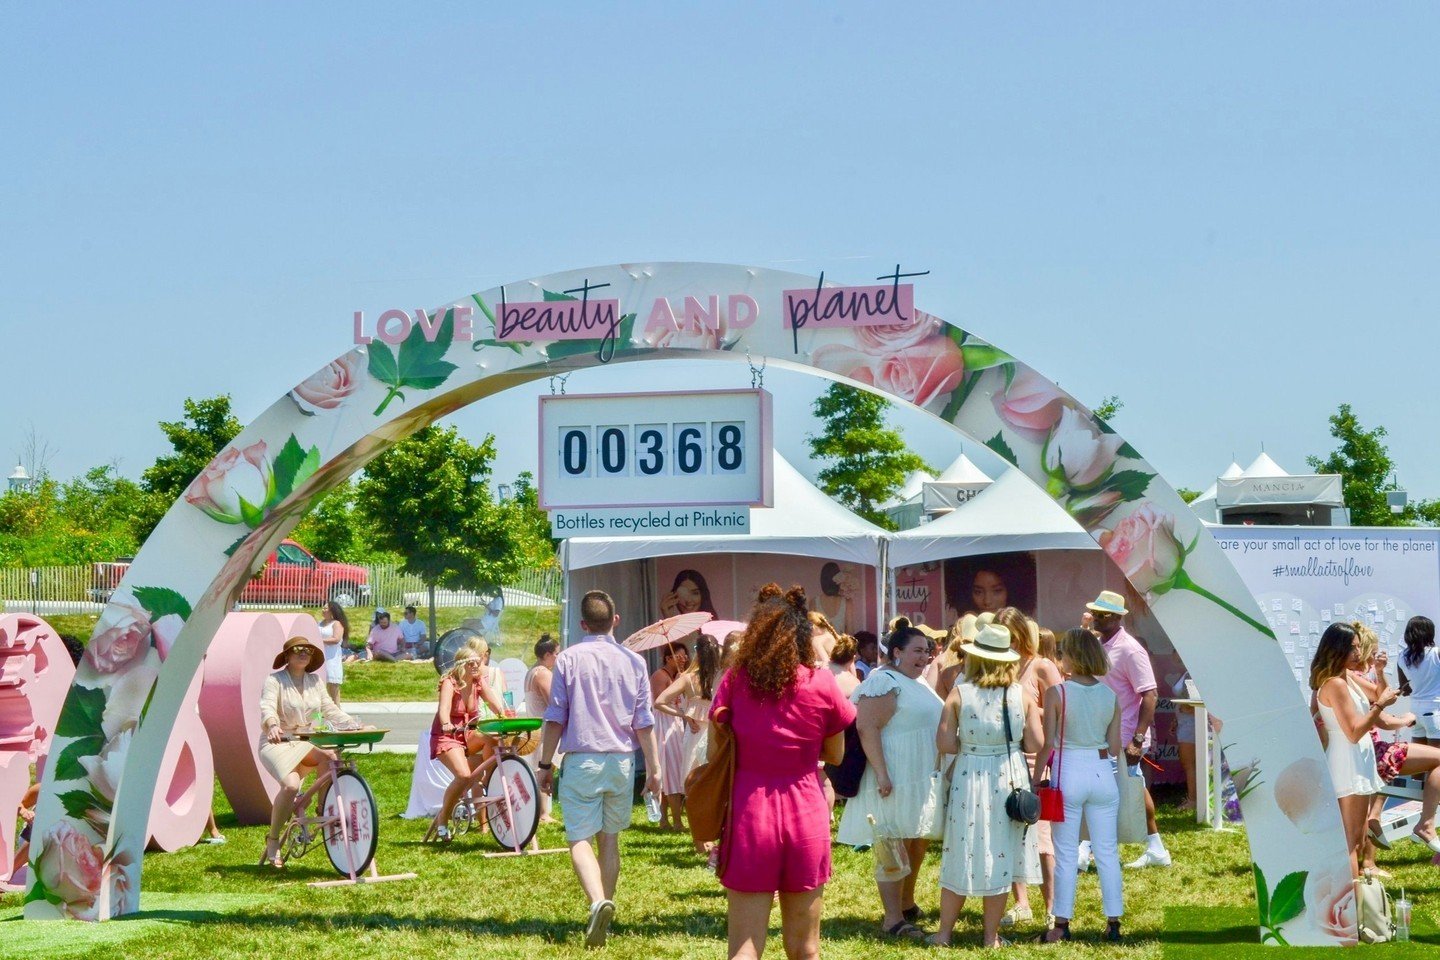 In honor of #EarthDay, we&rsquo;re taking a look back at a sustainability-focused @lovebeautyandplanet festival activation!⁠ 🌎⁠
⁠
We built a custom archway, seesaws, and stationary charging bikes where festivalgoers pedaled to power their devices th